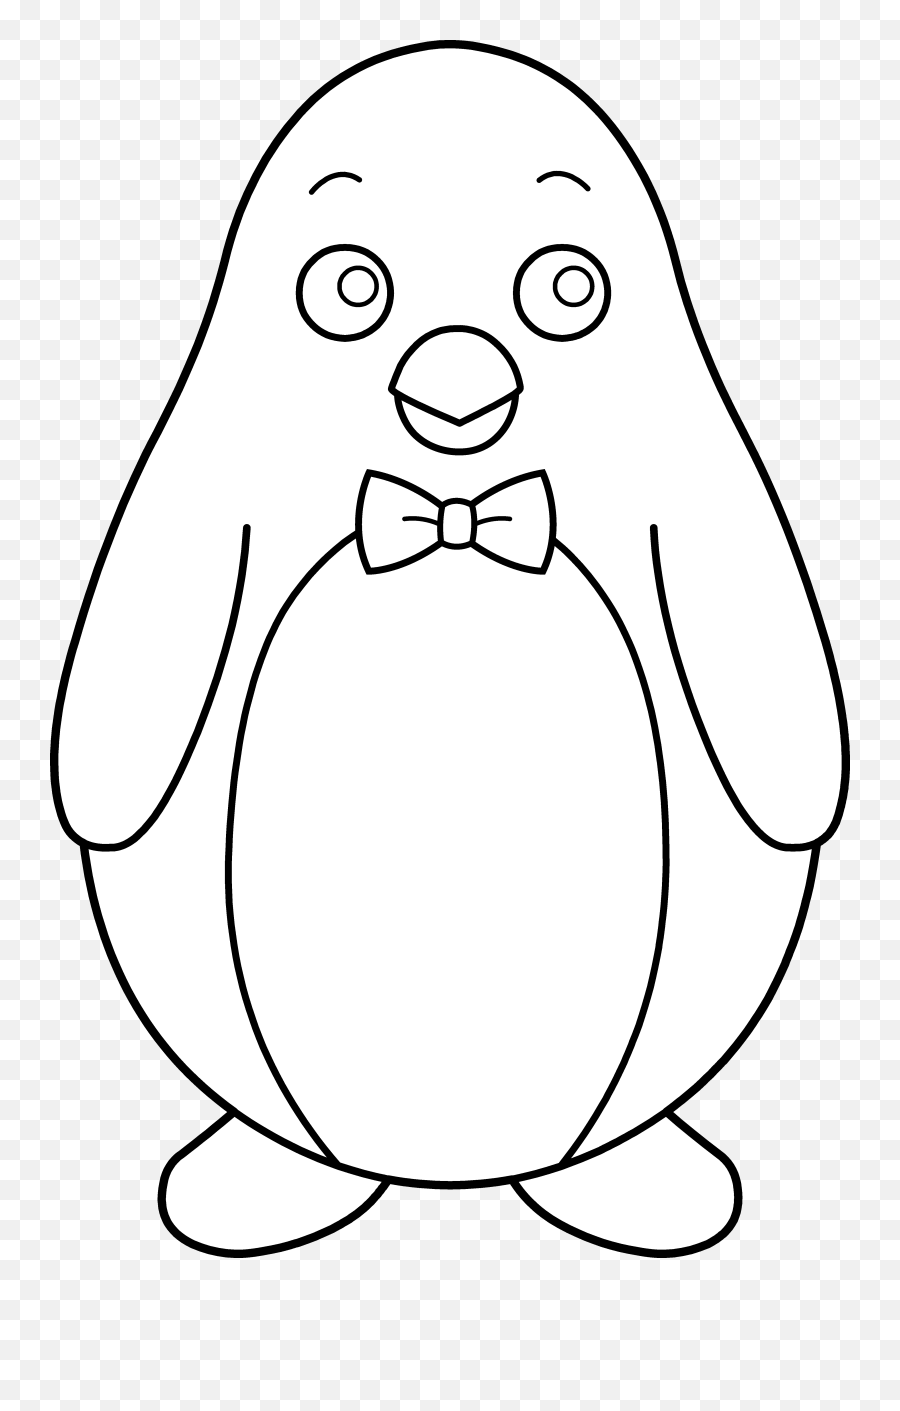 Free Black And White Penguin Clipart Download Free Clip Art - Black And White Clip Art Penguin Emoji,Penguin Clipart